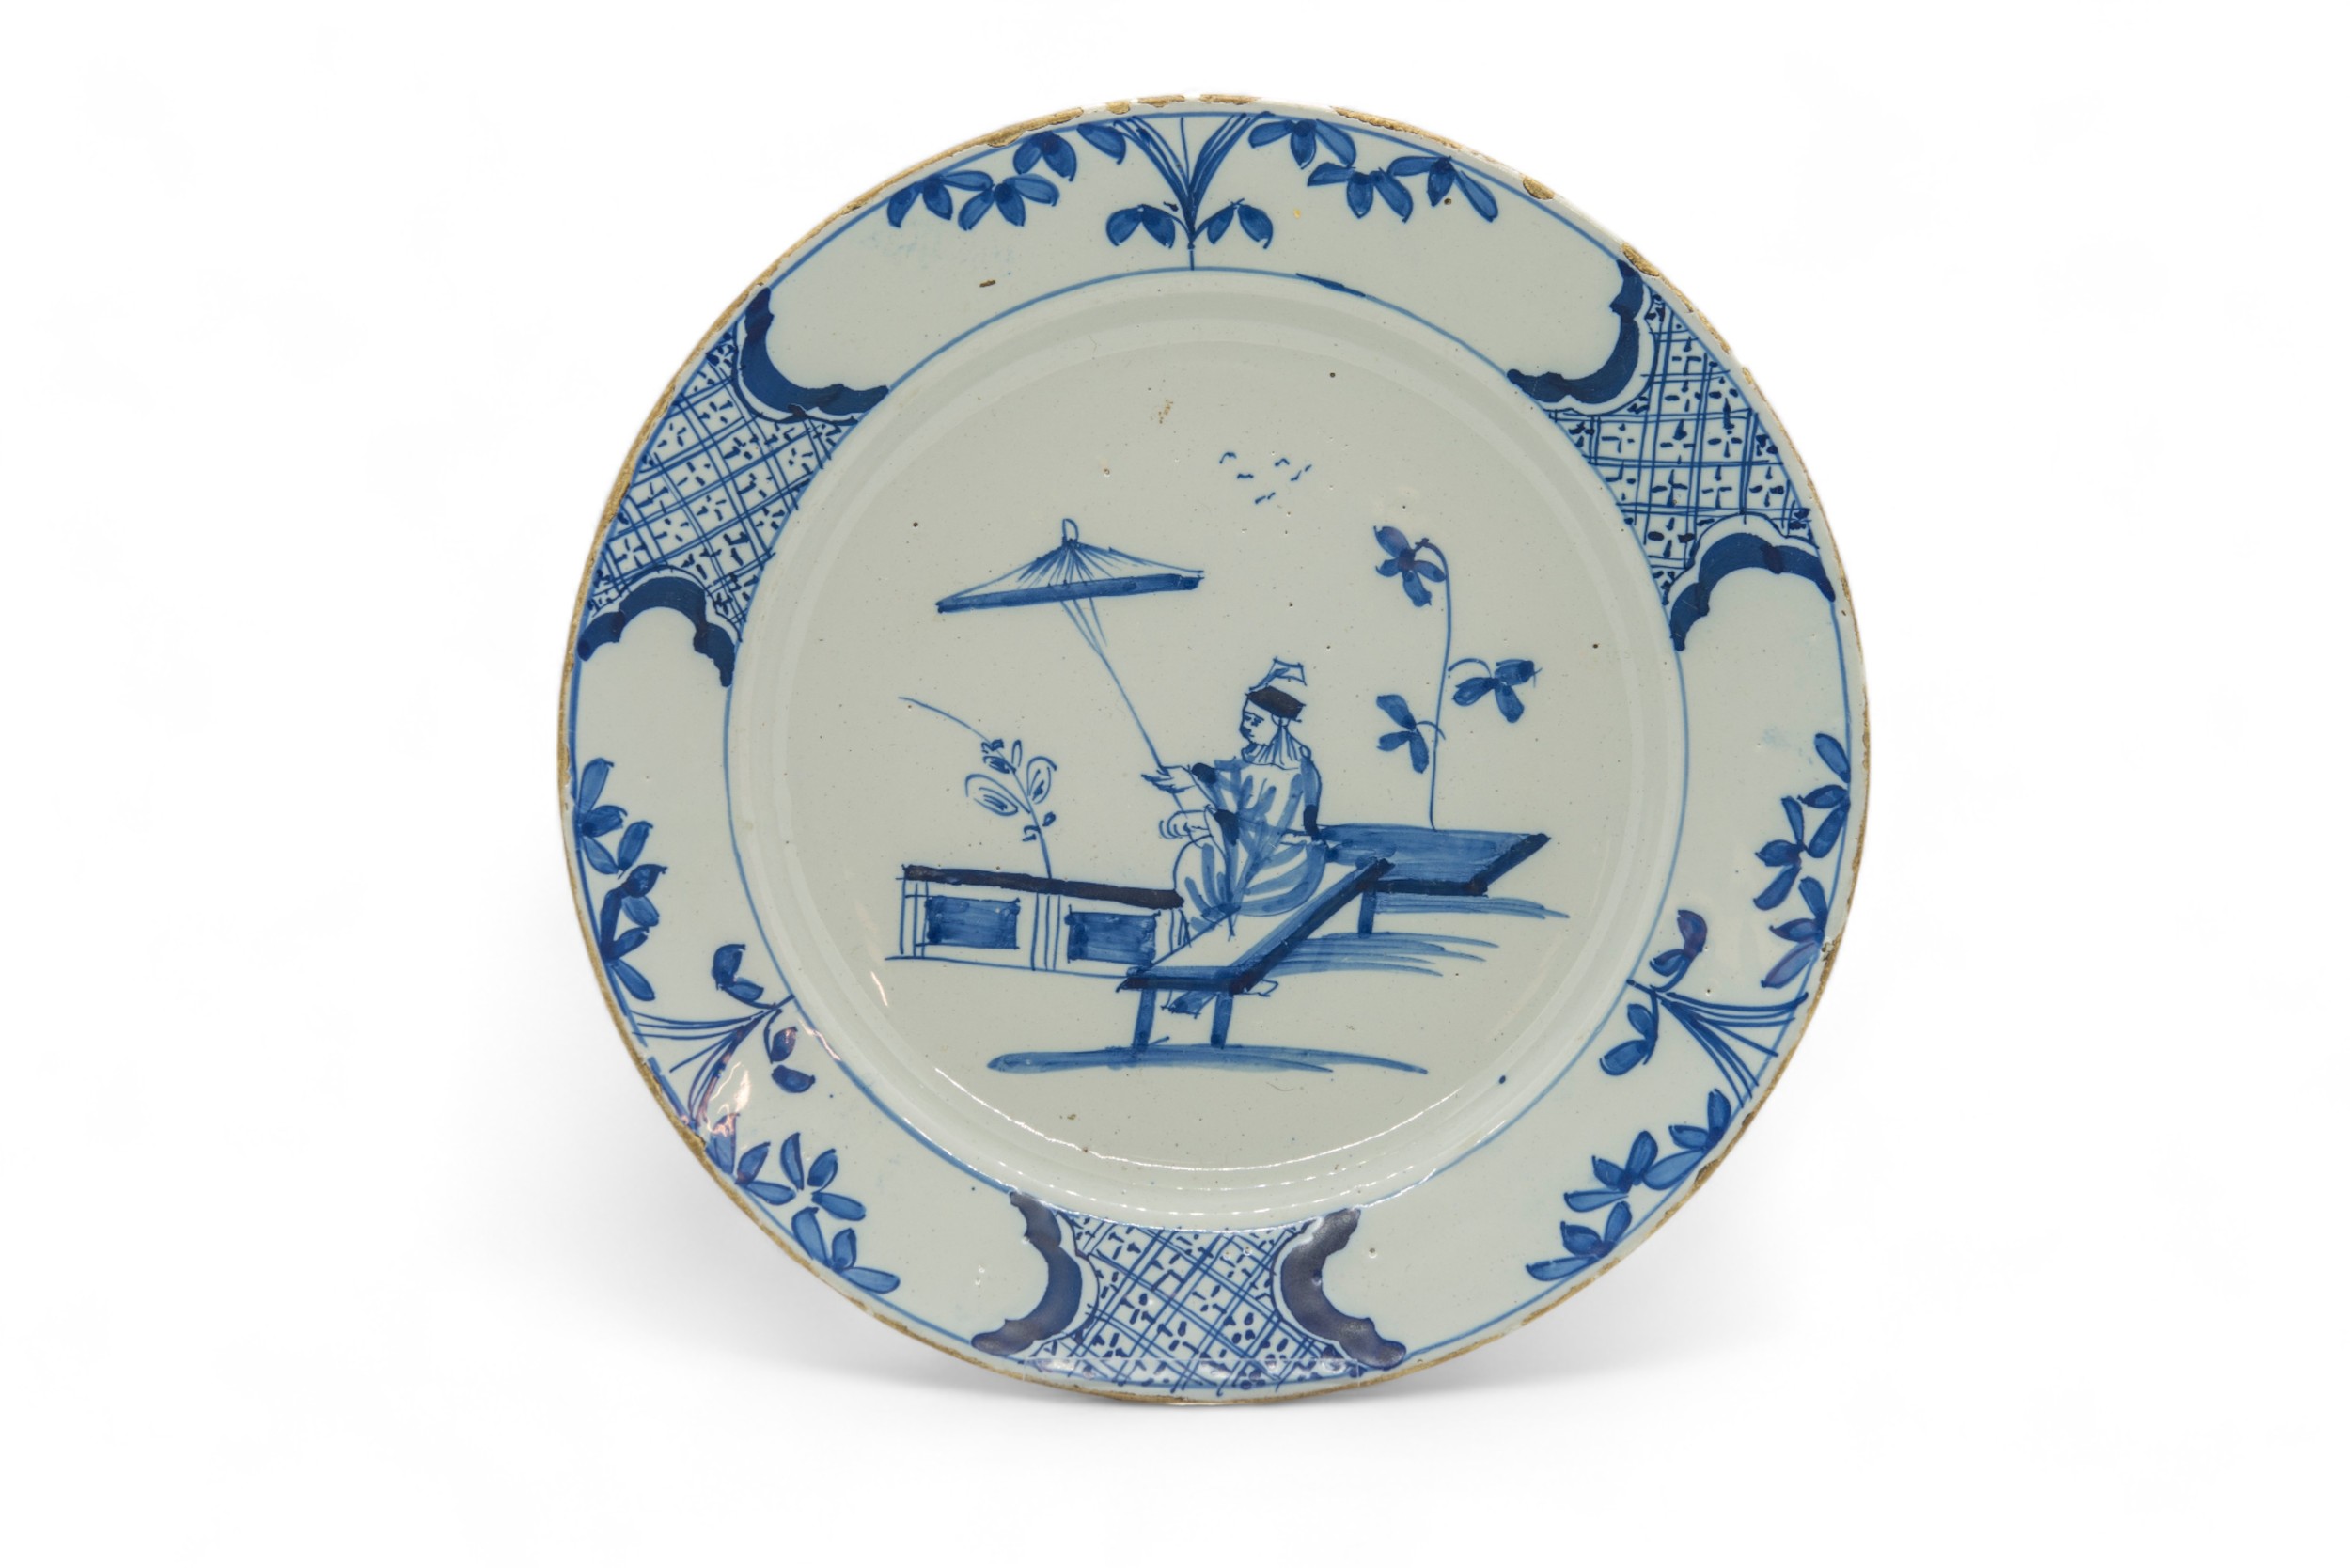 SIX DELFT PLATES 18th Century, one inscribed "T.M.LANE", 23cms wide - Image 7 of 7